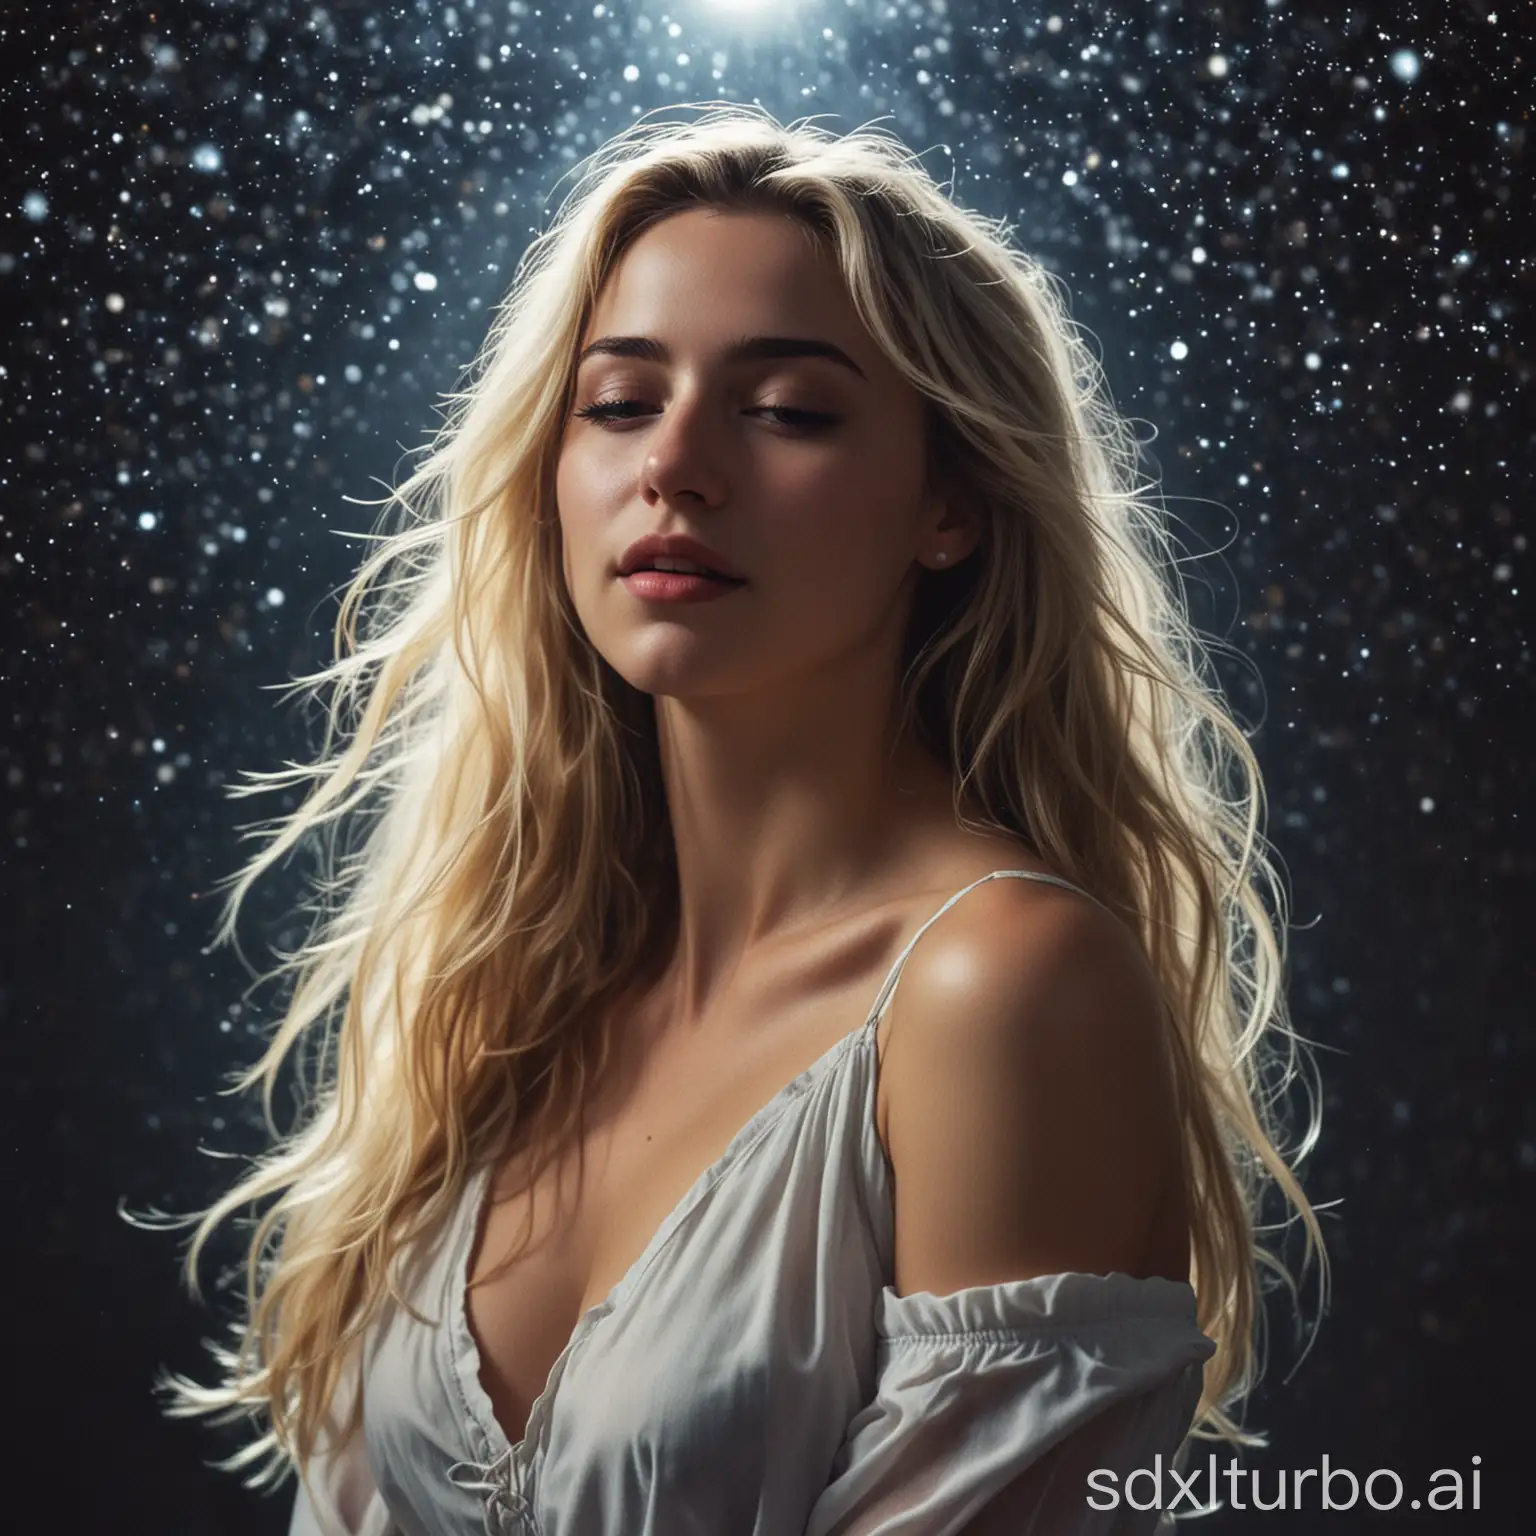 Starry-Night-Dance-Embracing-Love-and-Liberation-Under-the-Sparkling-Sky